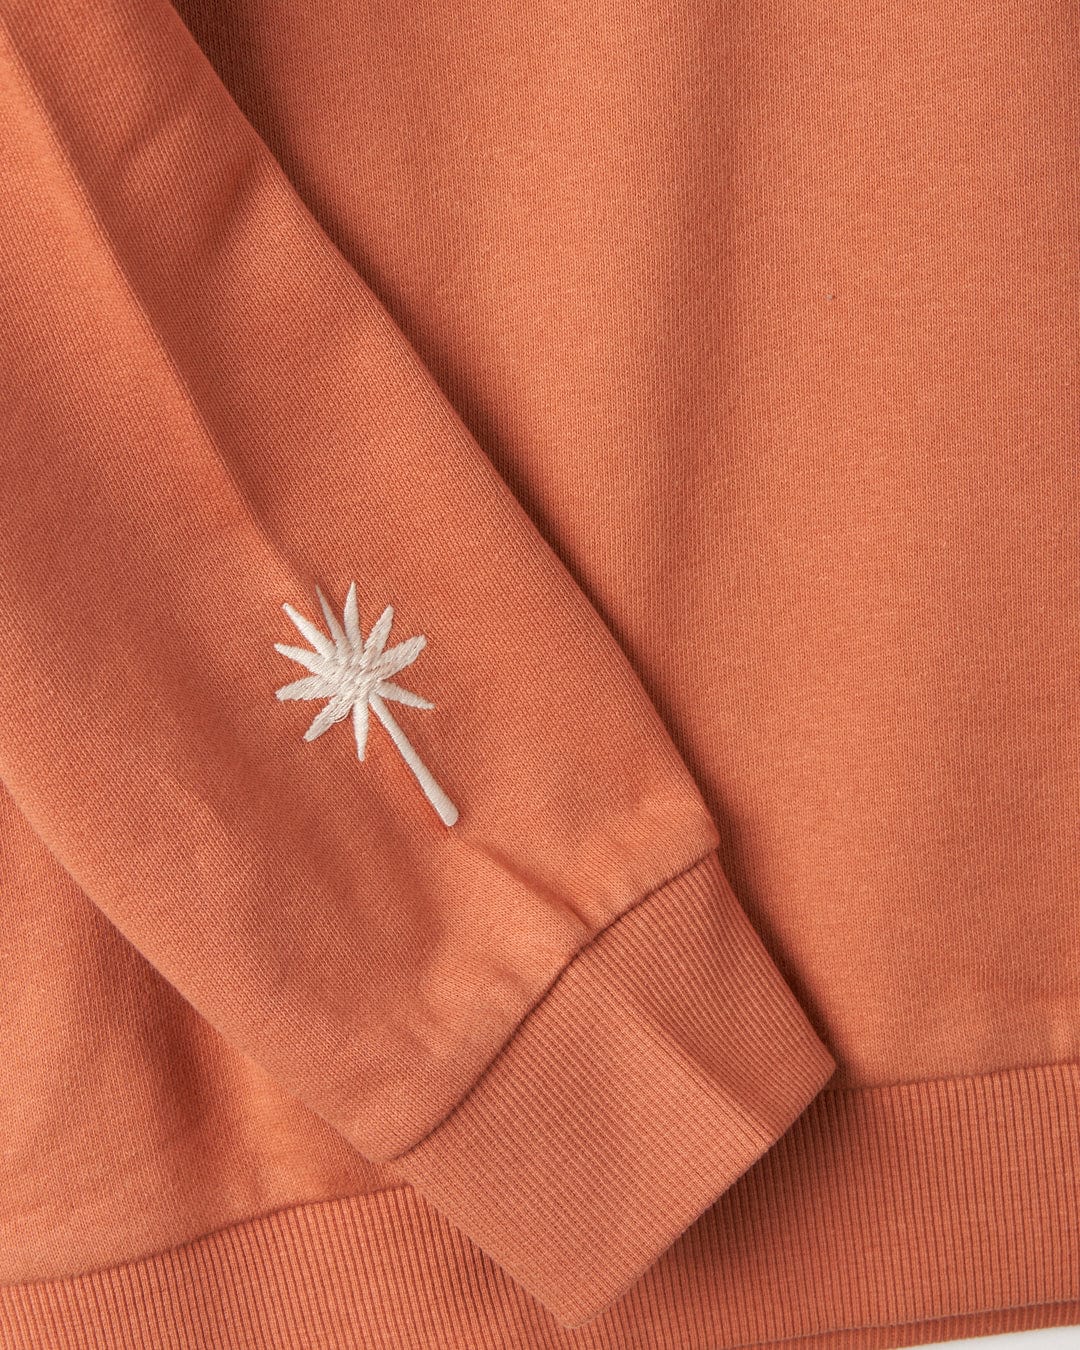 Close-up of a rust-colored long sleeve shirt with a white embroidered palm tree on the cuff. This relaxed fit Journey - Womens Sweatshirt - Peach from Saltrock, made from 100% cotton, beautifully showcases the intricate embroidered graphics for a stylish look.